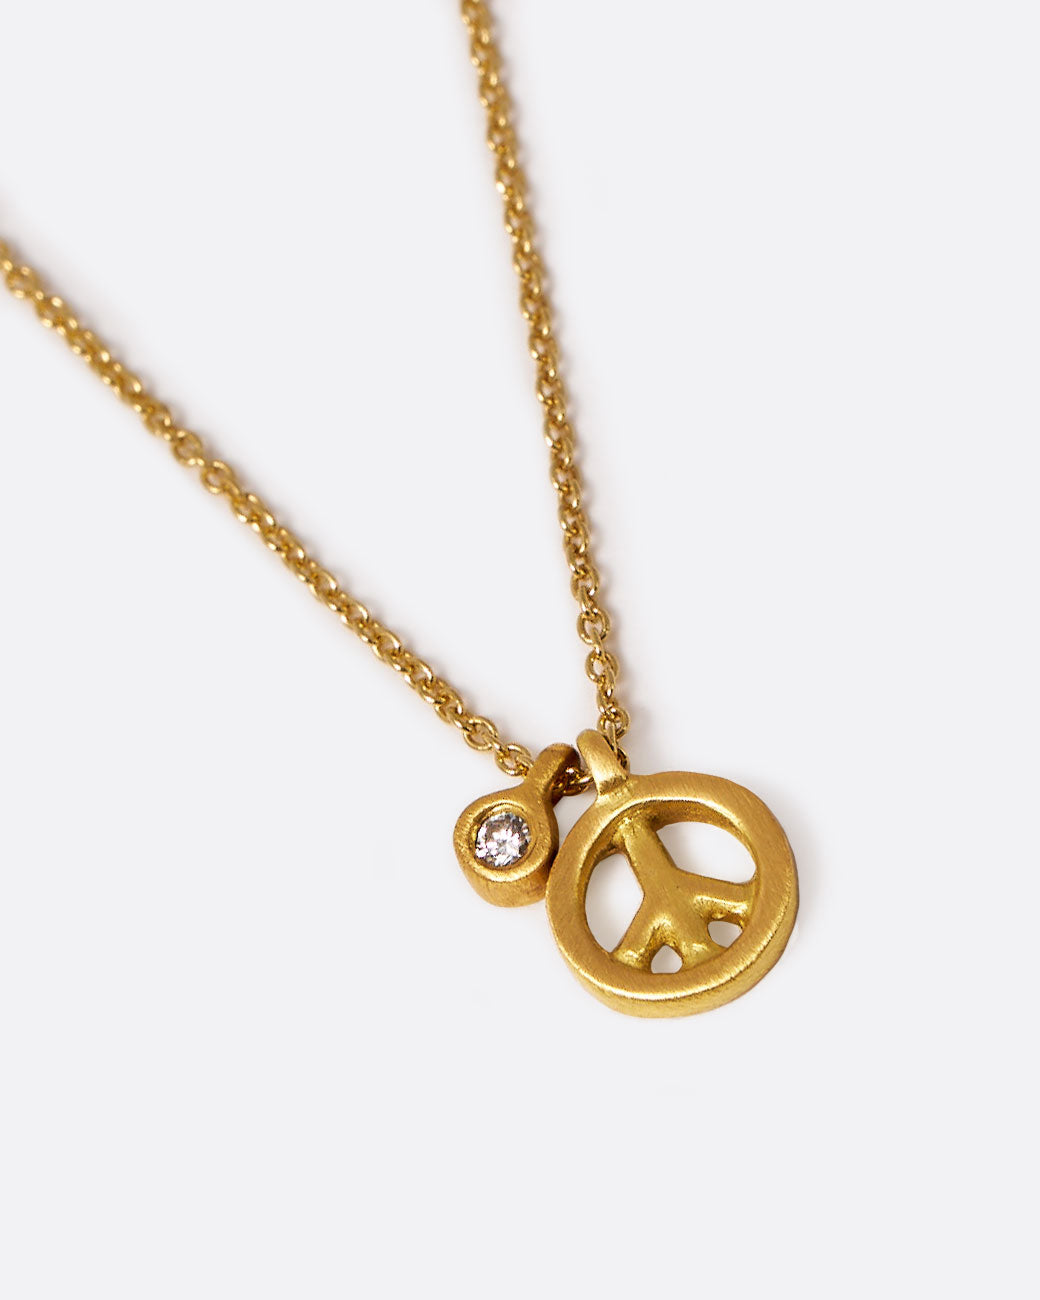 Marian Maurer yellow gold peace sign necklace with extra diamond tag, shown laying flat.